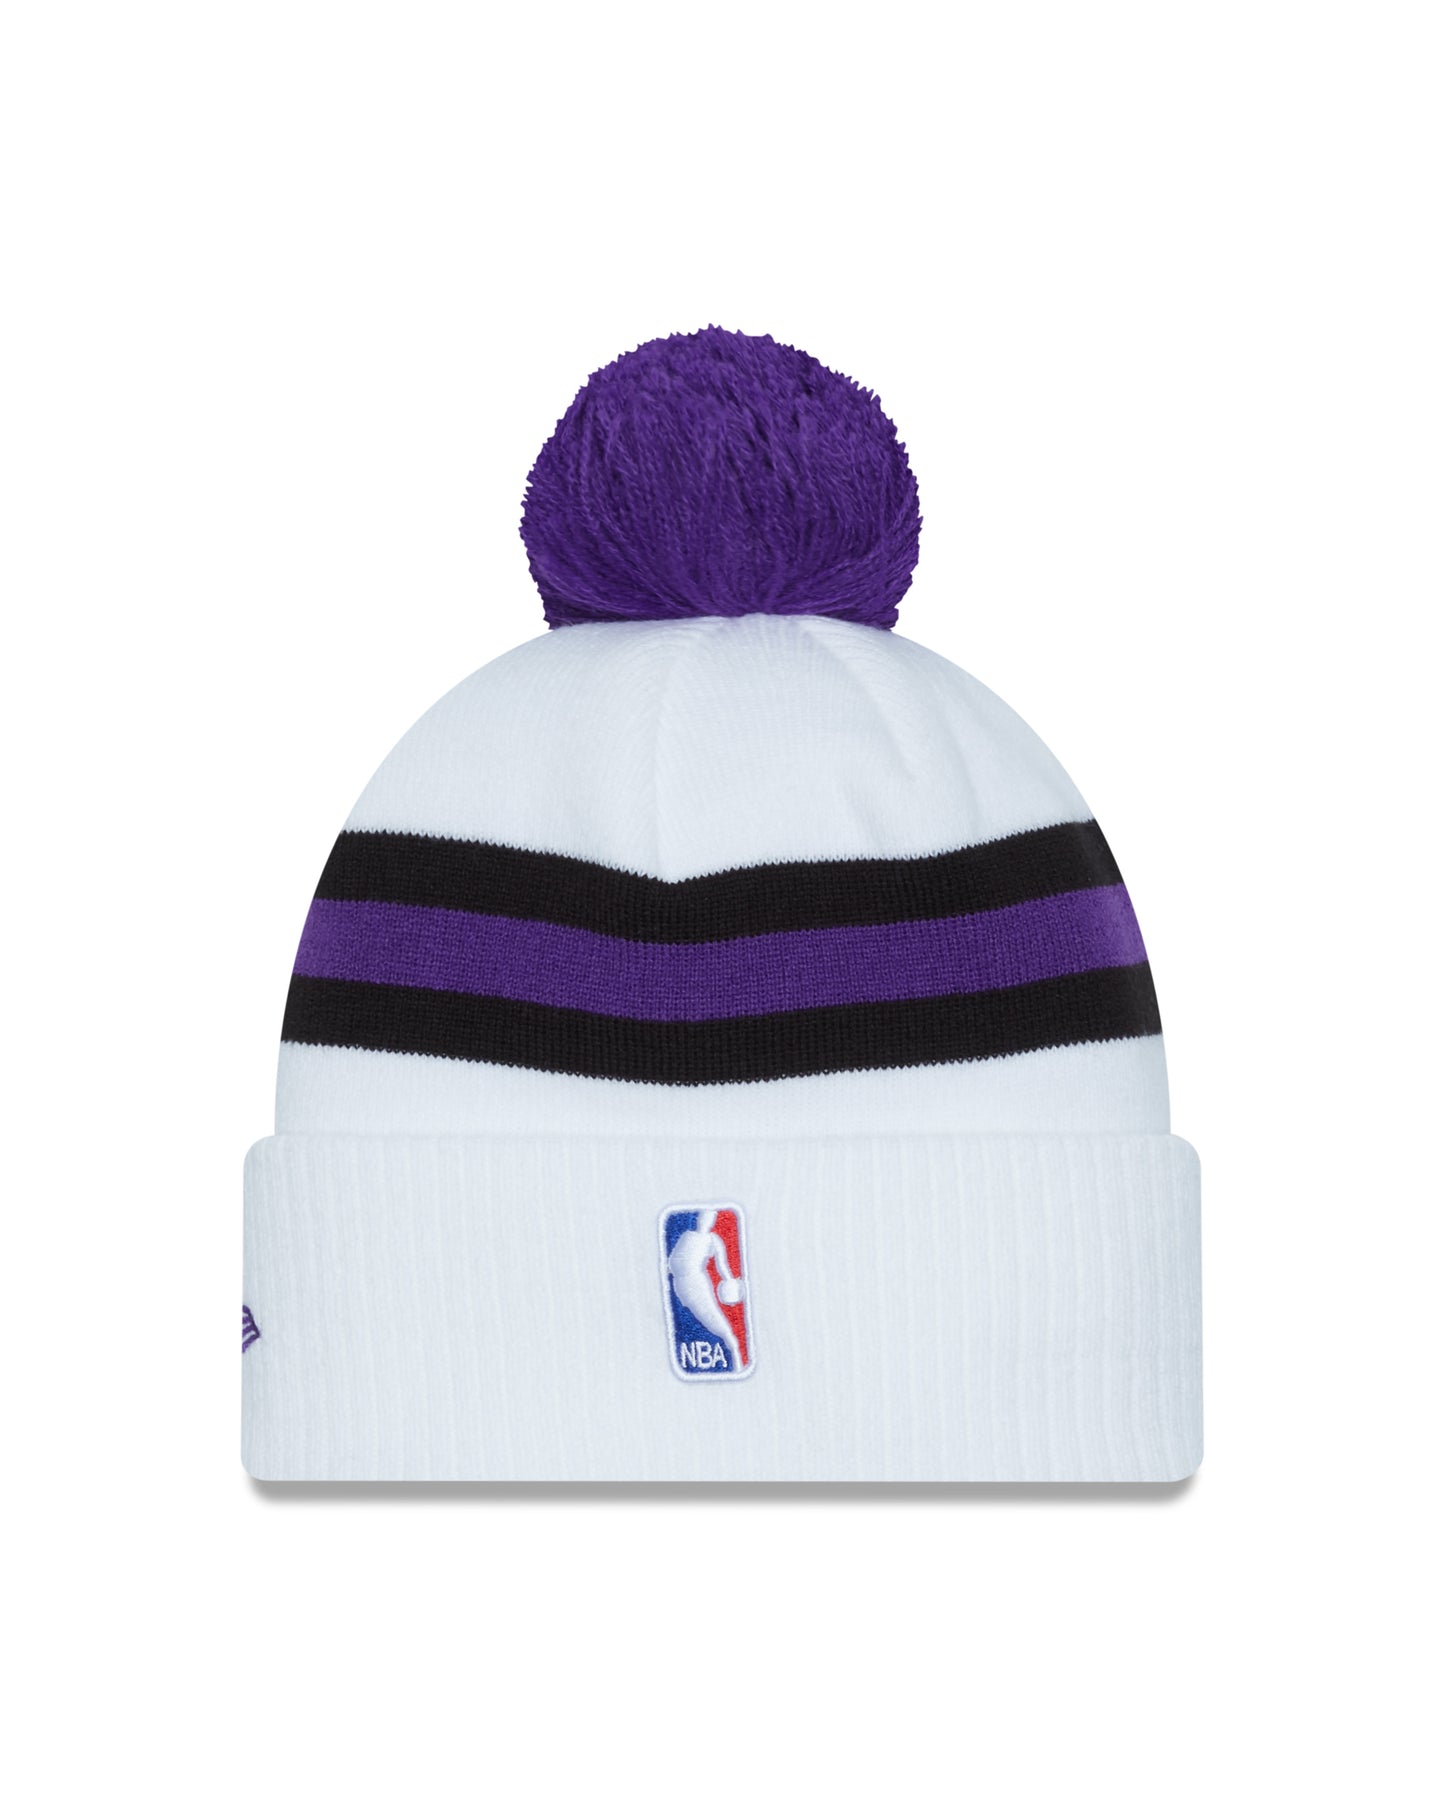 Los Angeles Lakers New Era City Edition Knit Hat